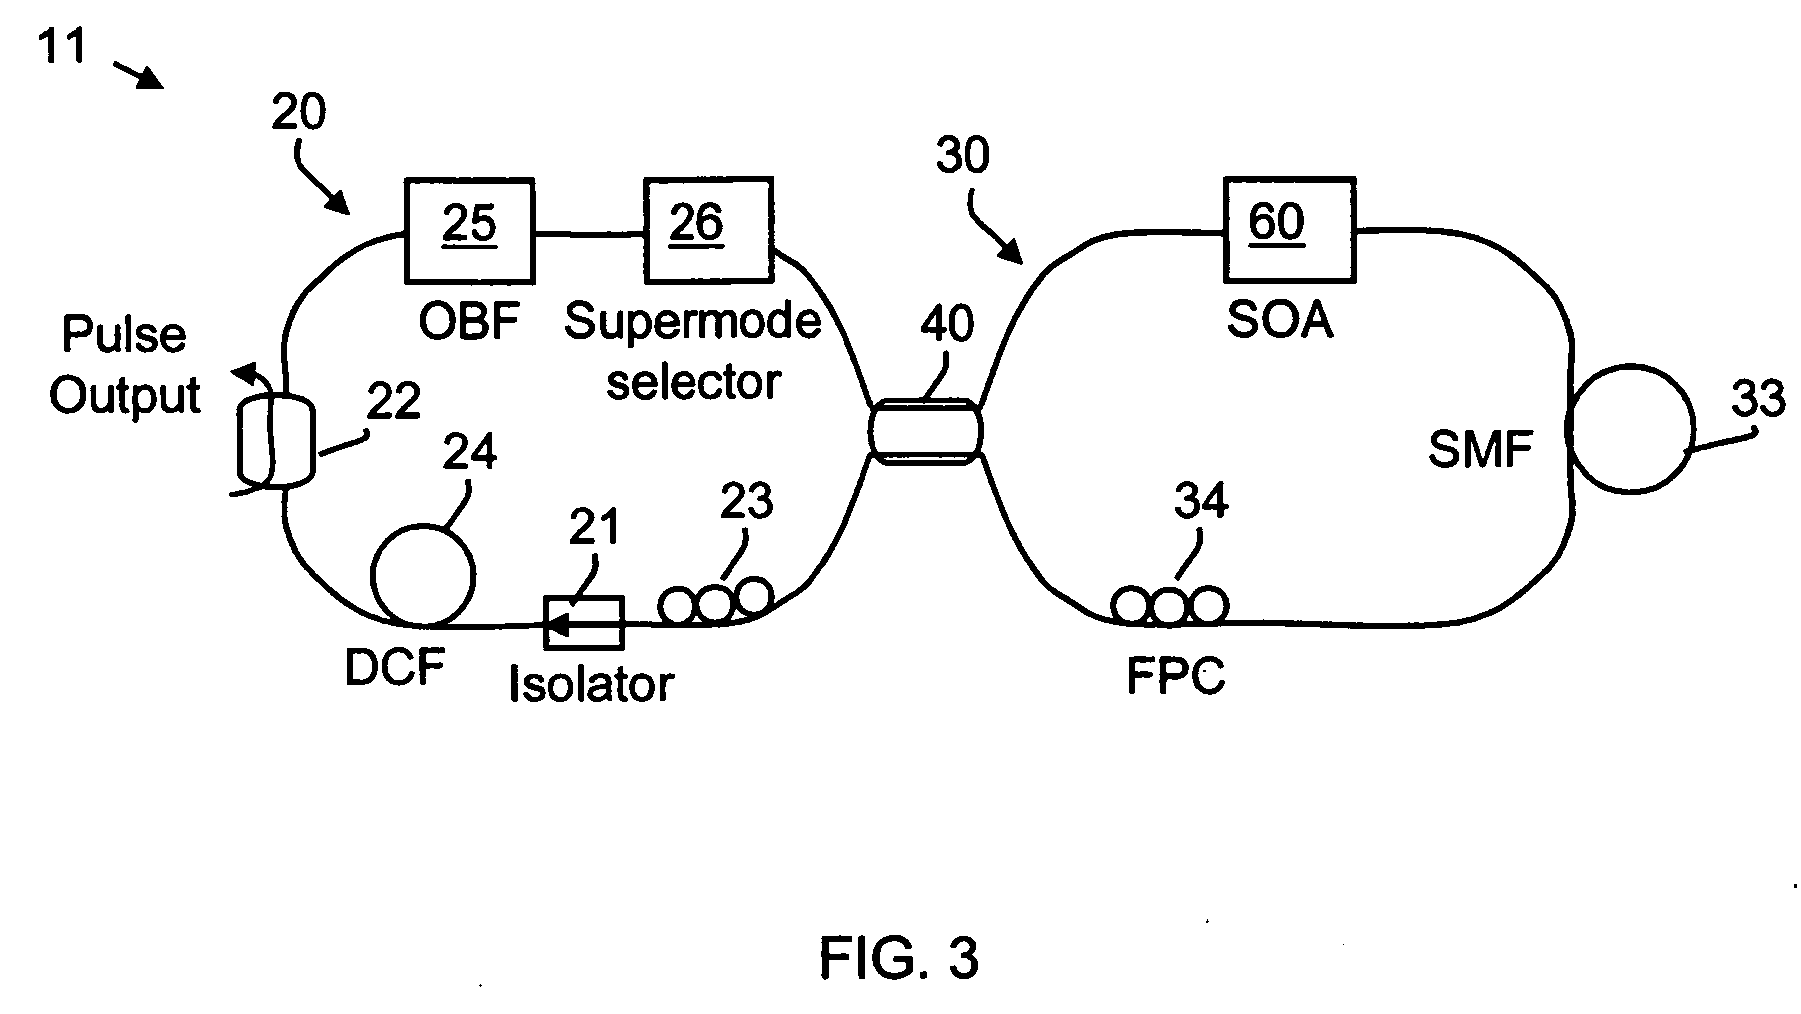 Systems and methods for generating high repetition rate ultra-short optical pulses